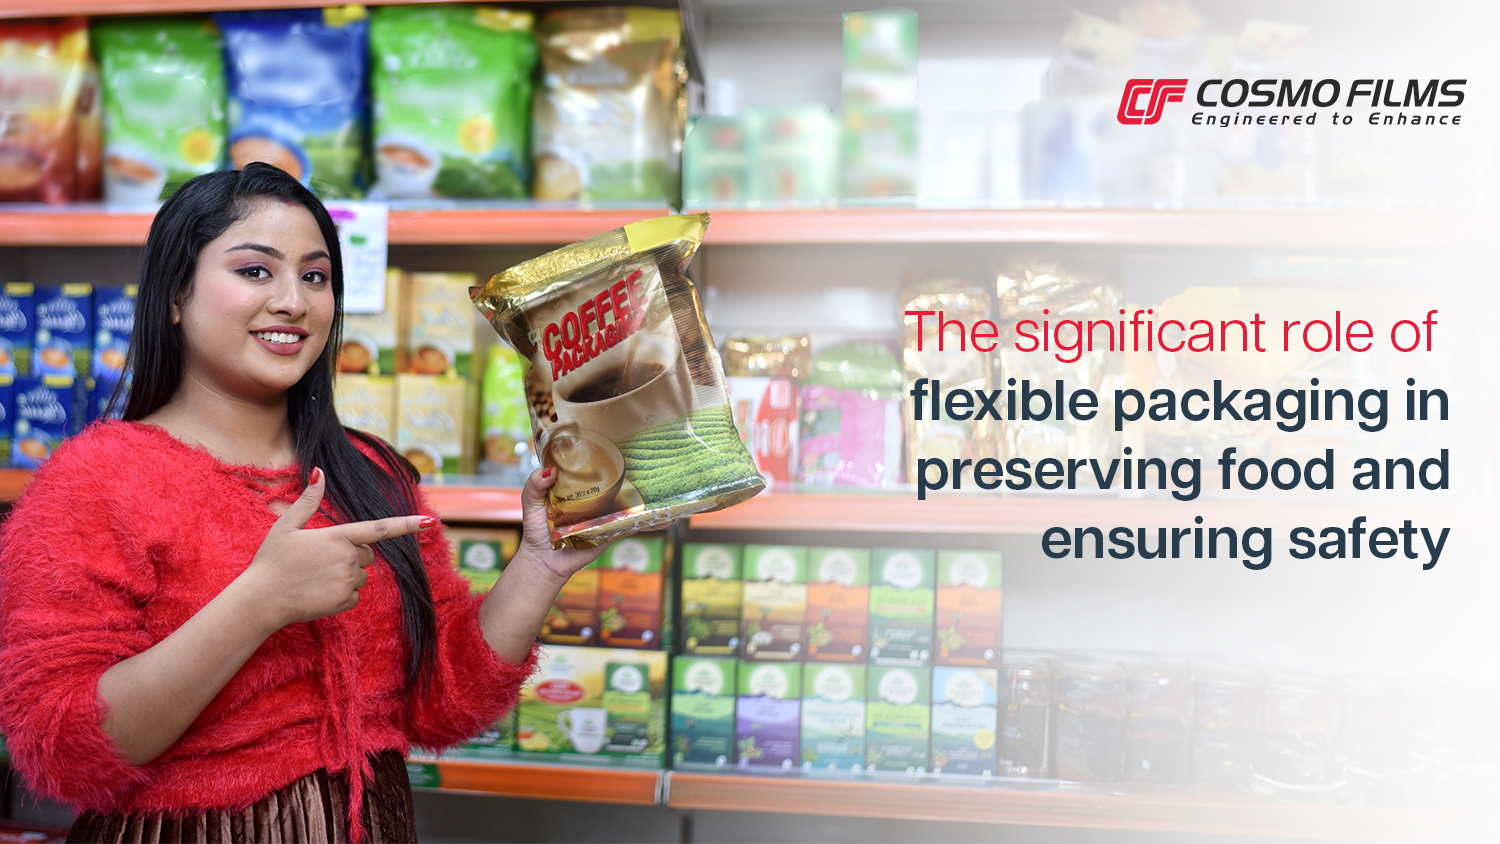 The Role of Flexible Packaging in Food Preservation and Safety